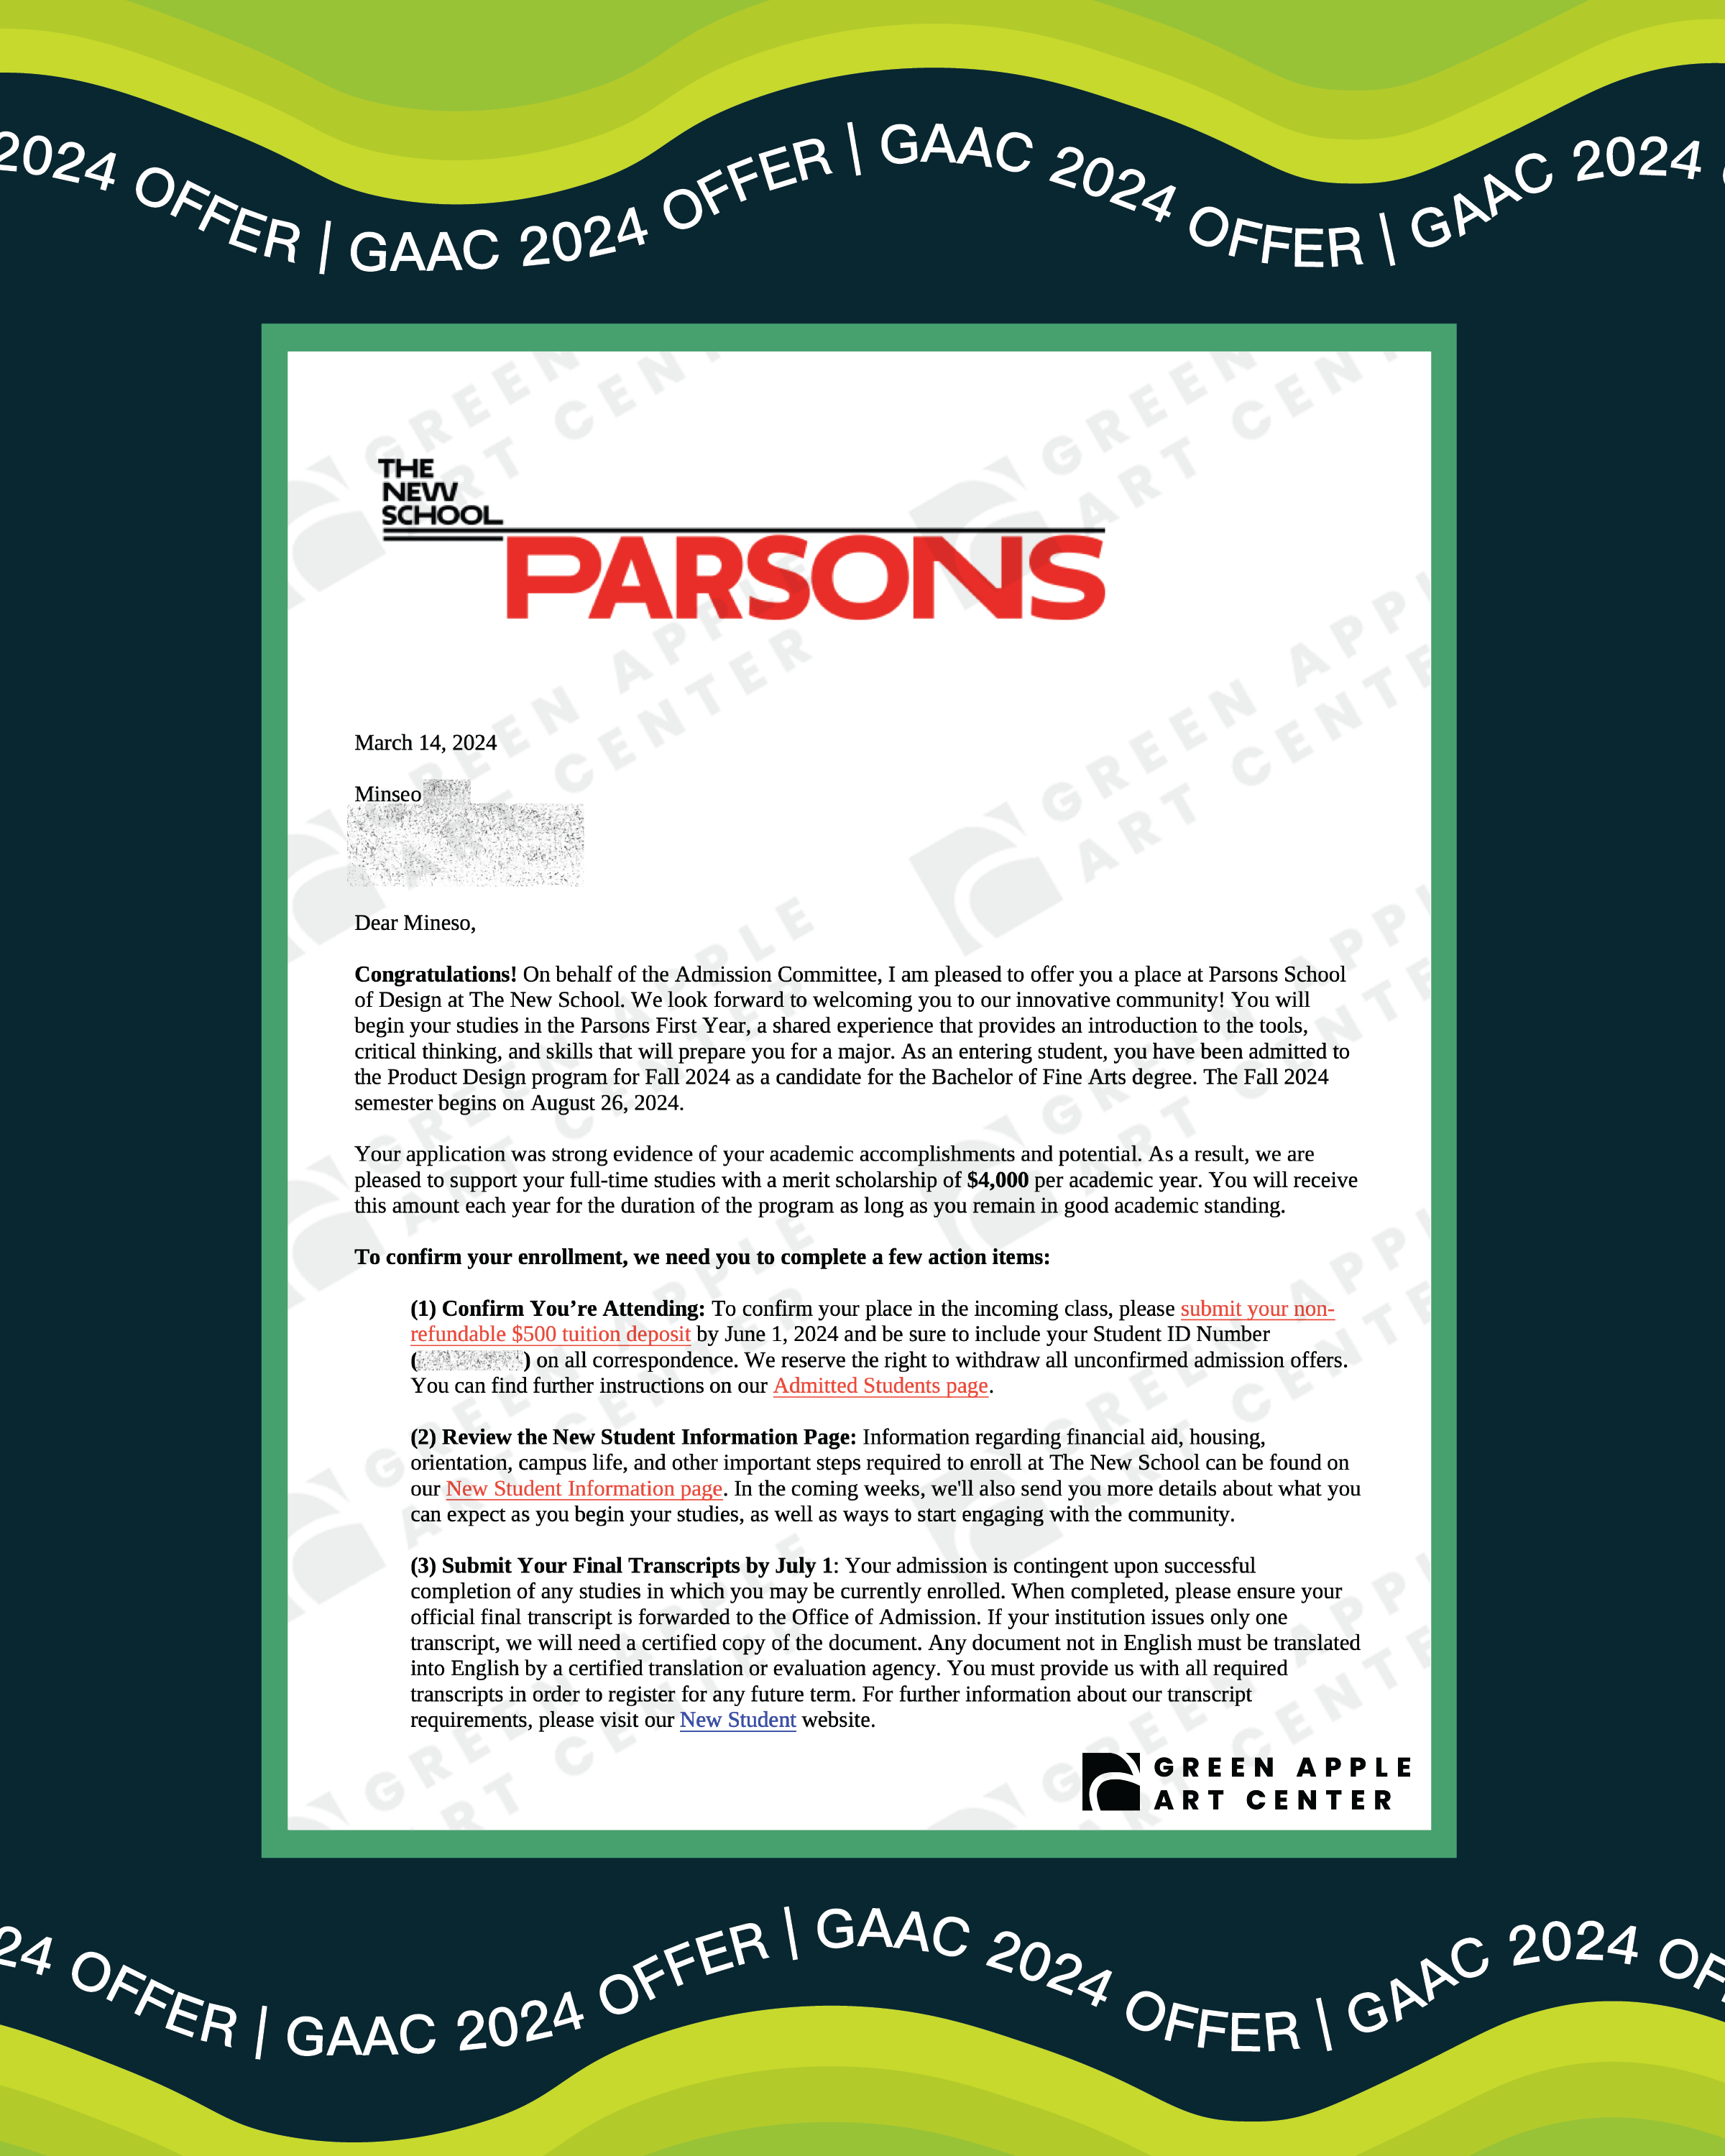 Minseo-Parsons.png